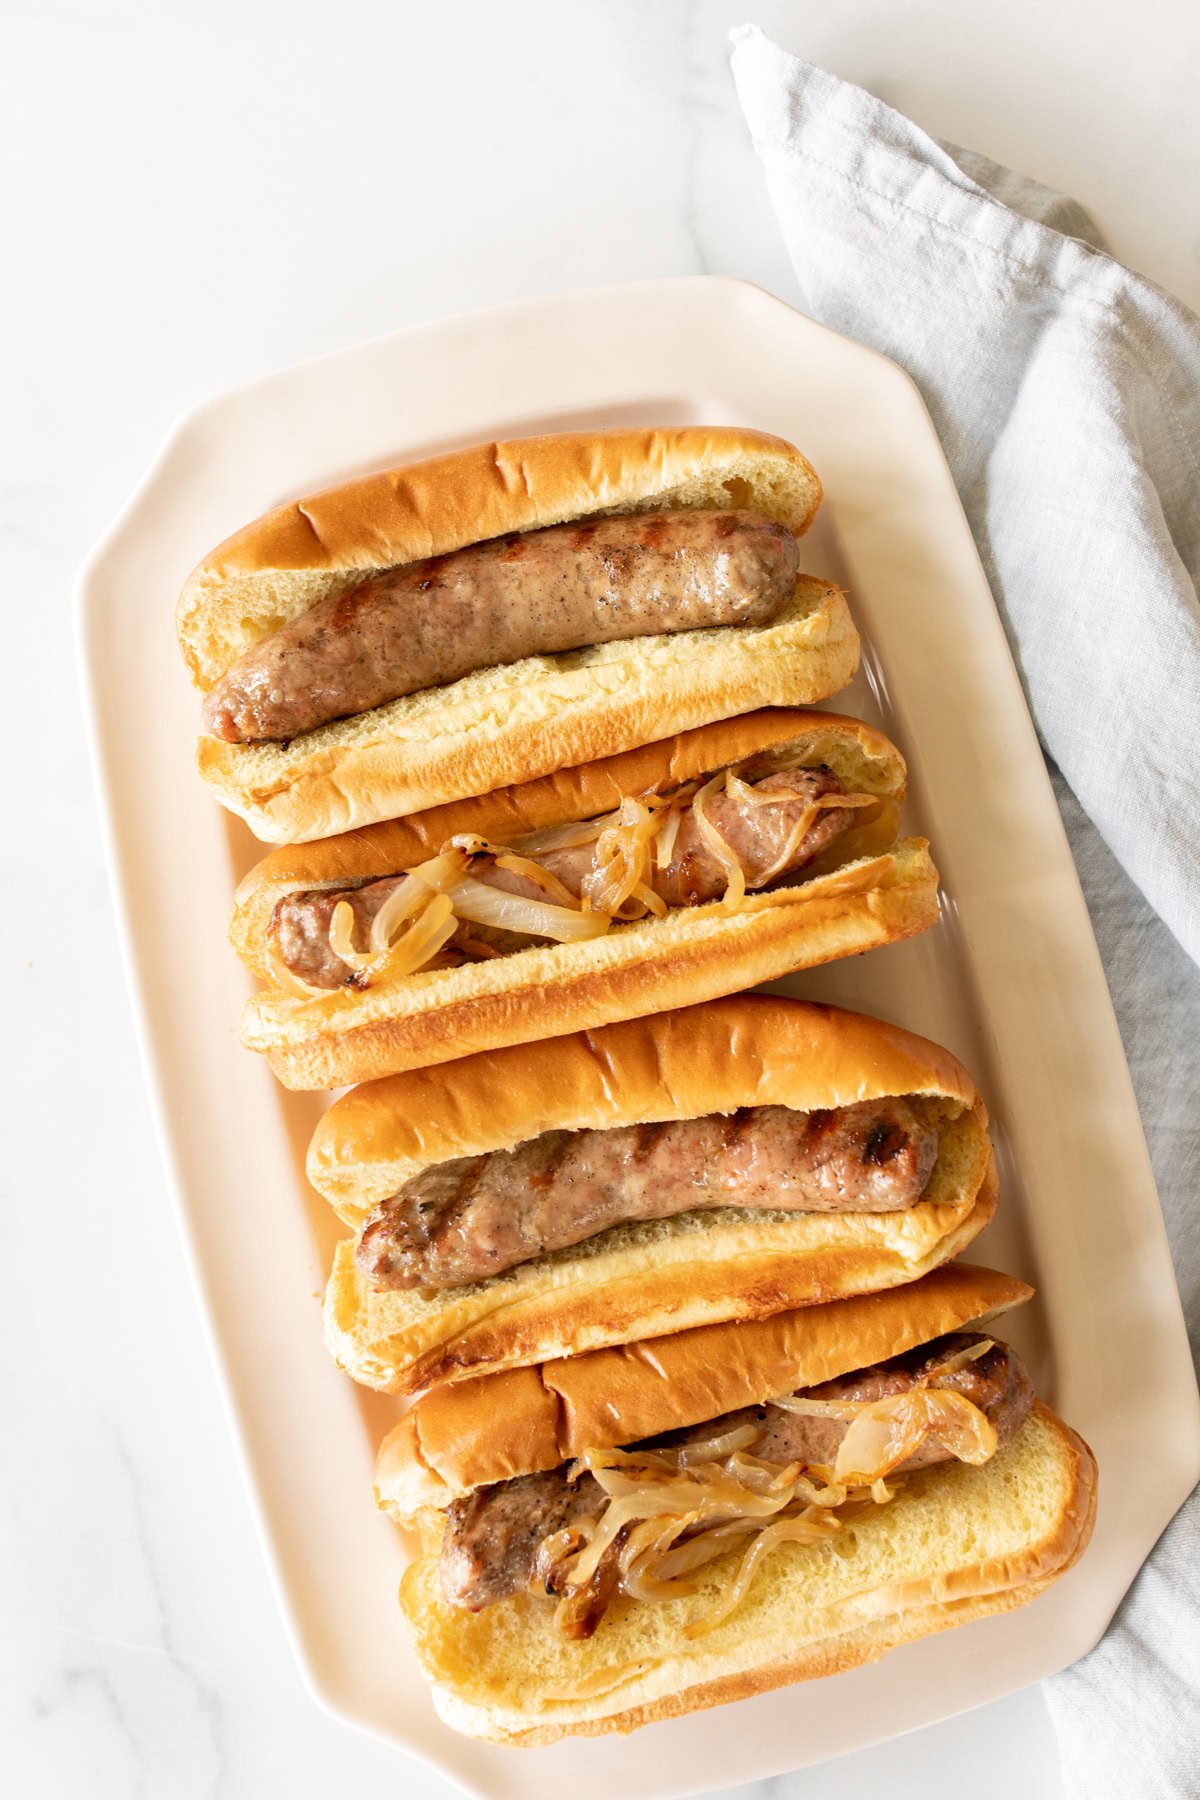 A white plate holding four cooking bratwursts in buns with caramelized onions, placed next to a light gray cloth napkin on a marble surface.